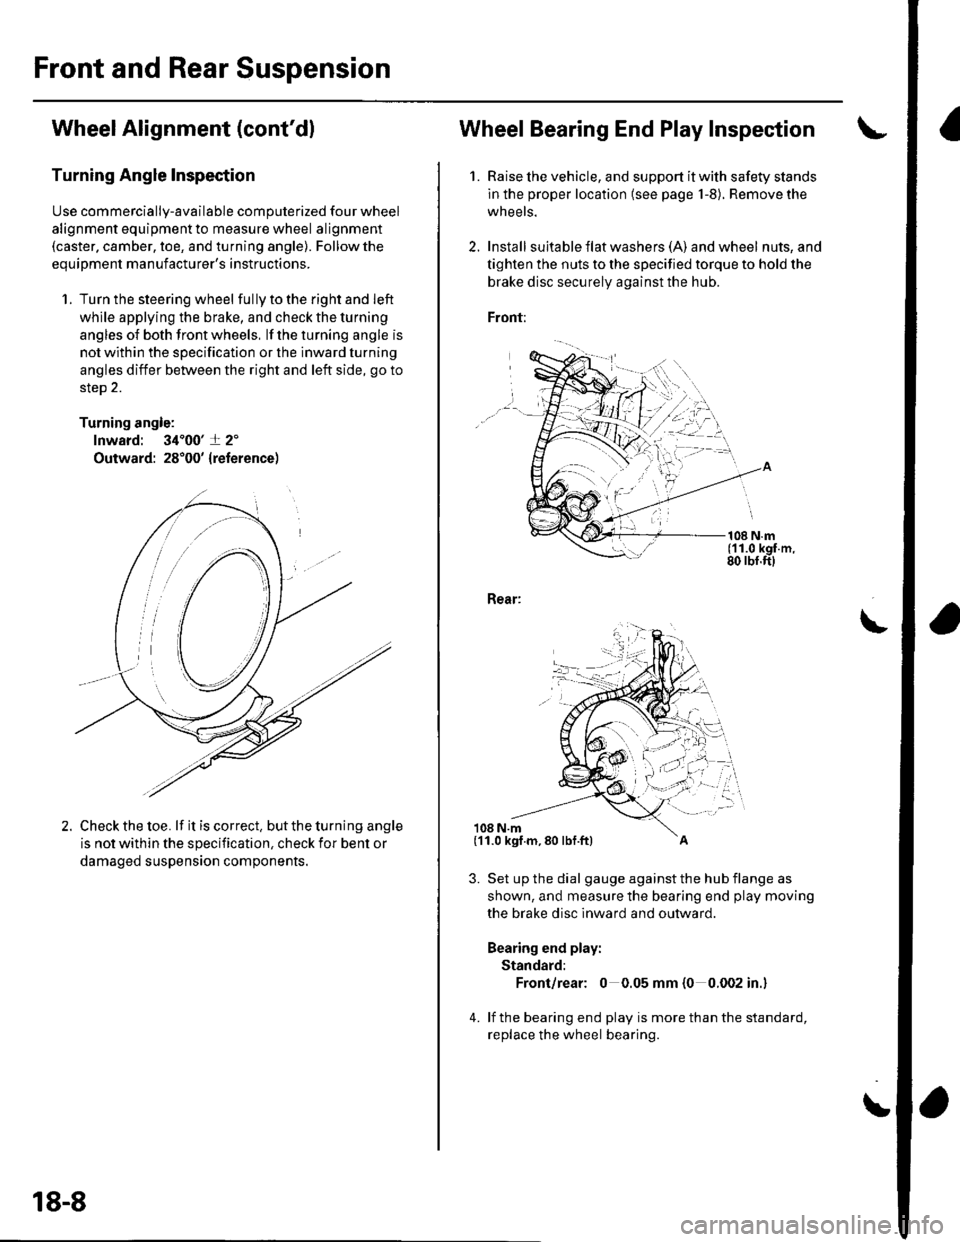 HONDA CIVIC 2003 7.G Service Manual Front and Rear Suspension
Wheel Alignment (contdl
Turning Angle Inspection
Use commercially-available computerized four wheel
alignment equipment to measure wheel alignment(caster. camber, toe, and t